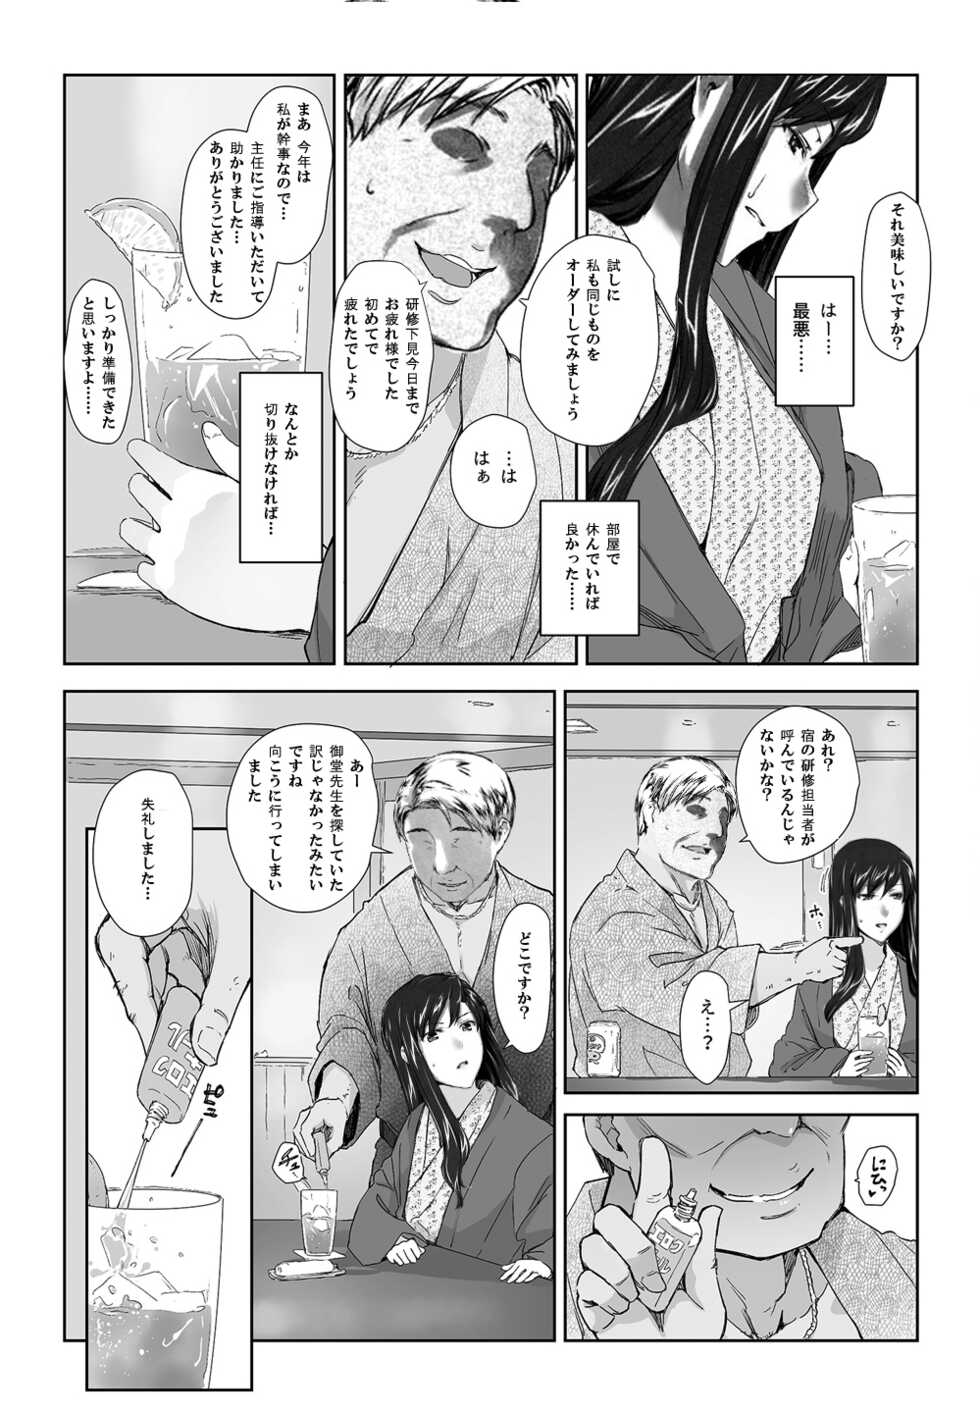 Sakiko-san in delusion Vol.8 ~Sakiko-san's circumstance at an educational training Route3~ (collage) (Continue to “First day of study trip” (page 42) of Vol.1) - Page 4